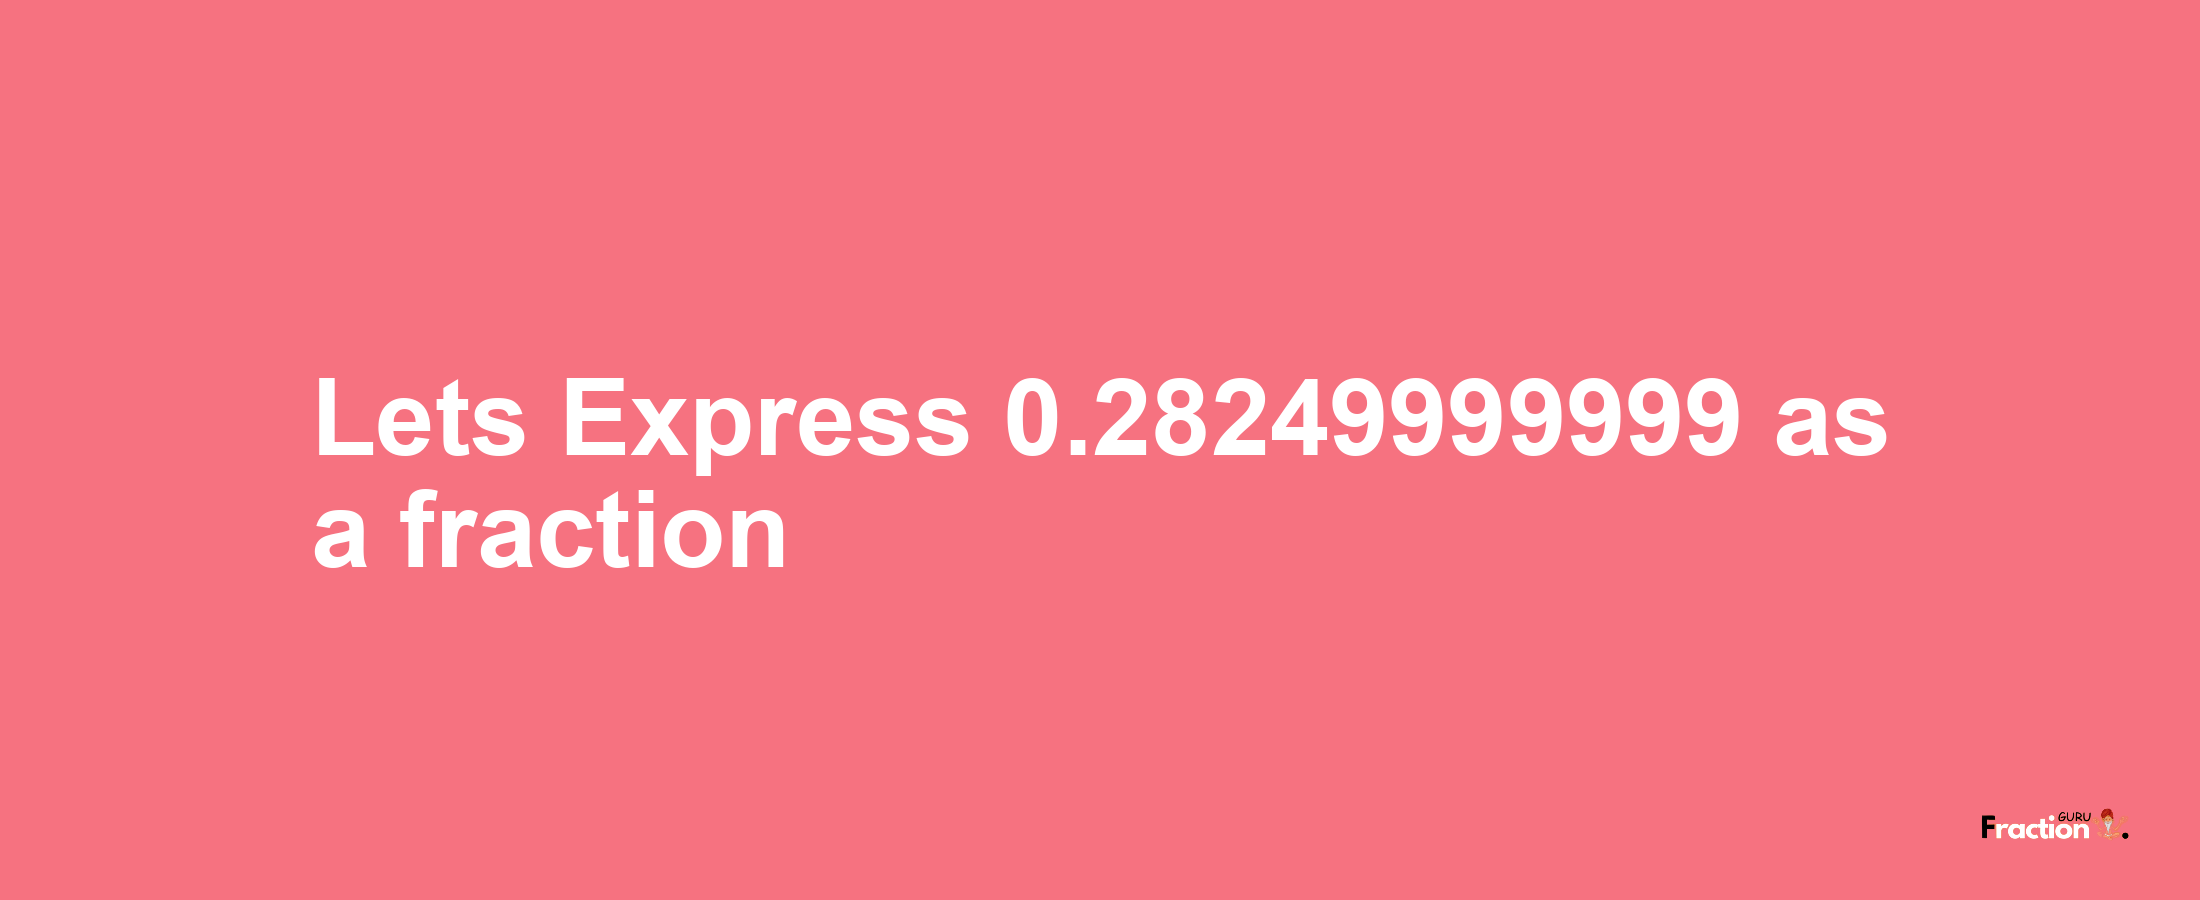 Lets Express 0.28249999999 as afraction